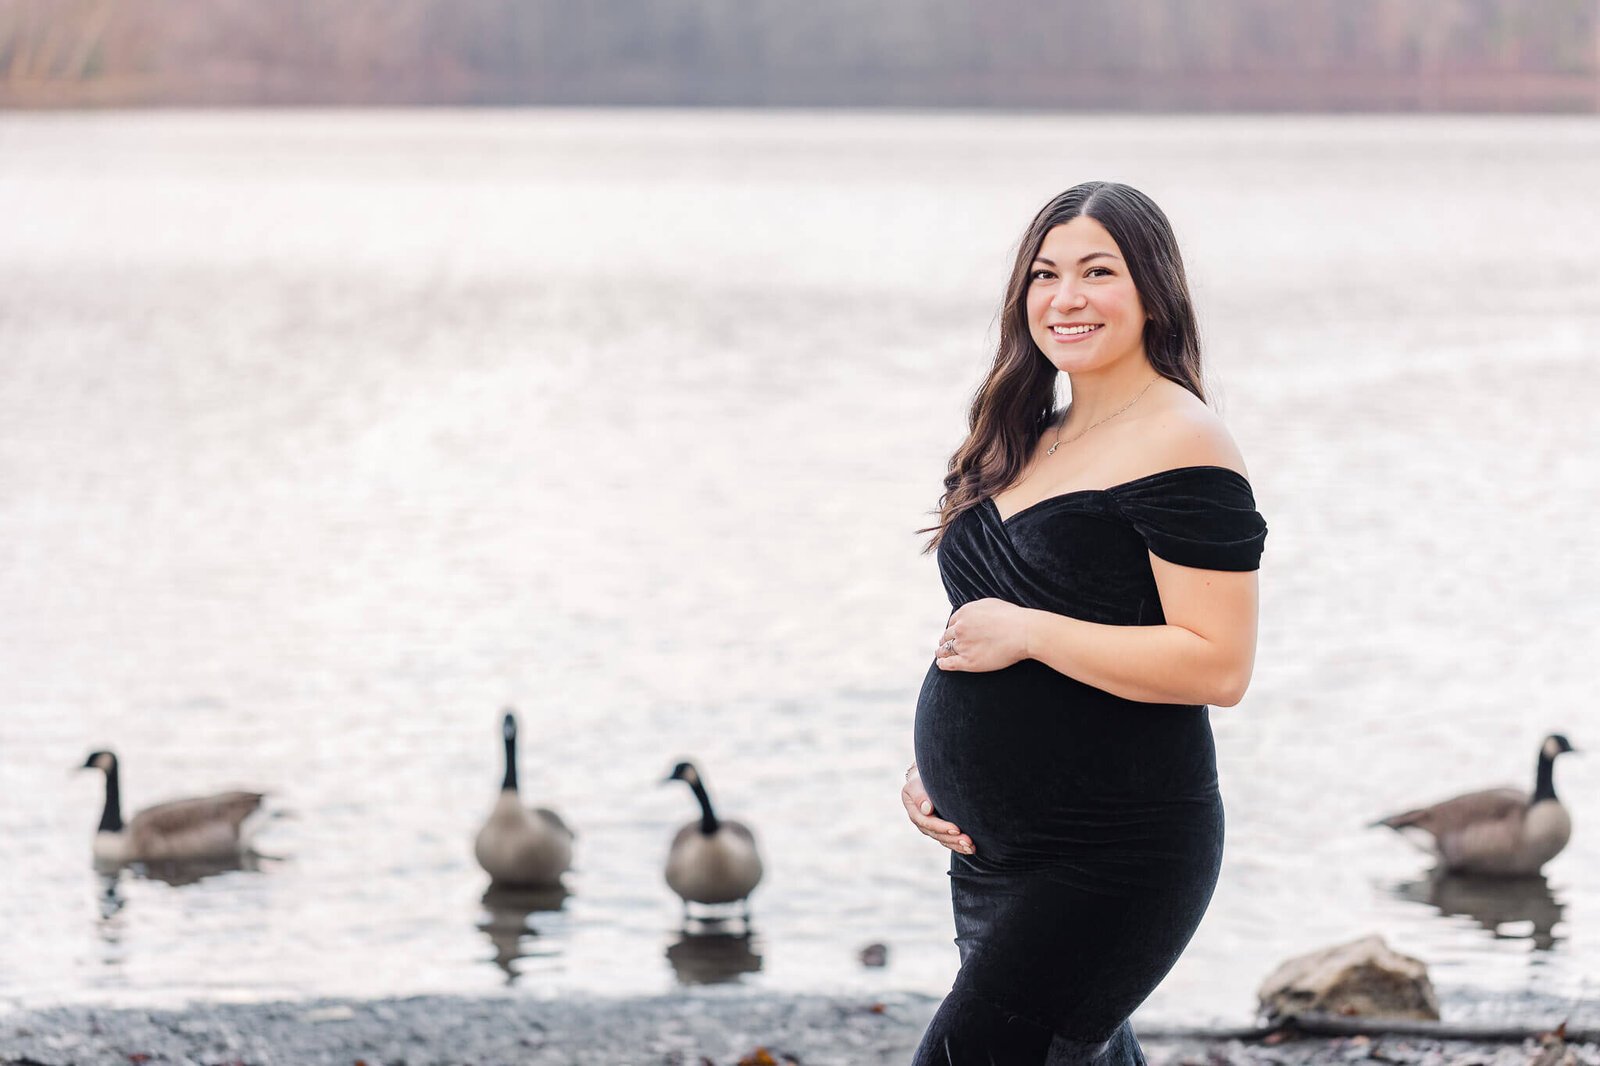 A pregnant woman in a black dress posing in front of a Burke Lake full of geese.